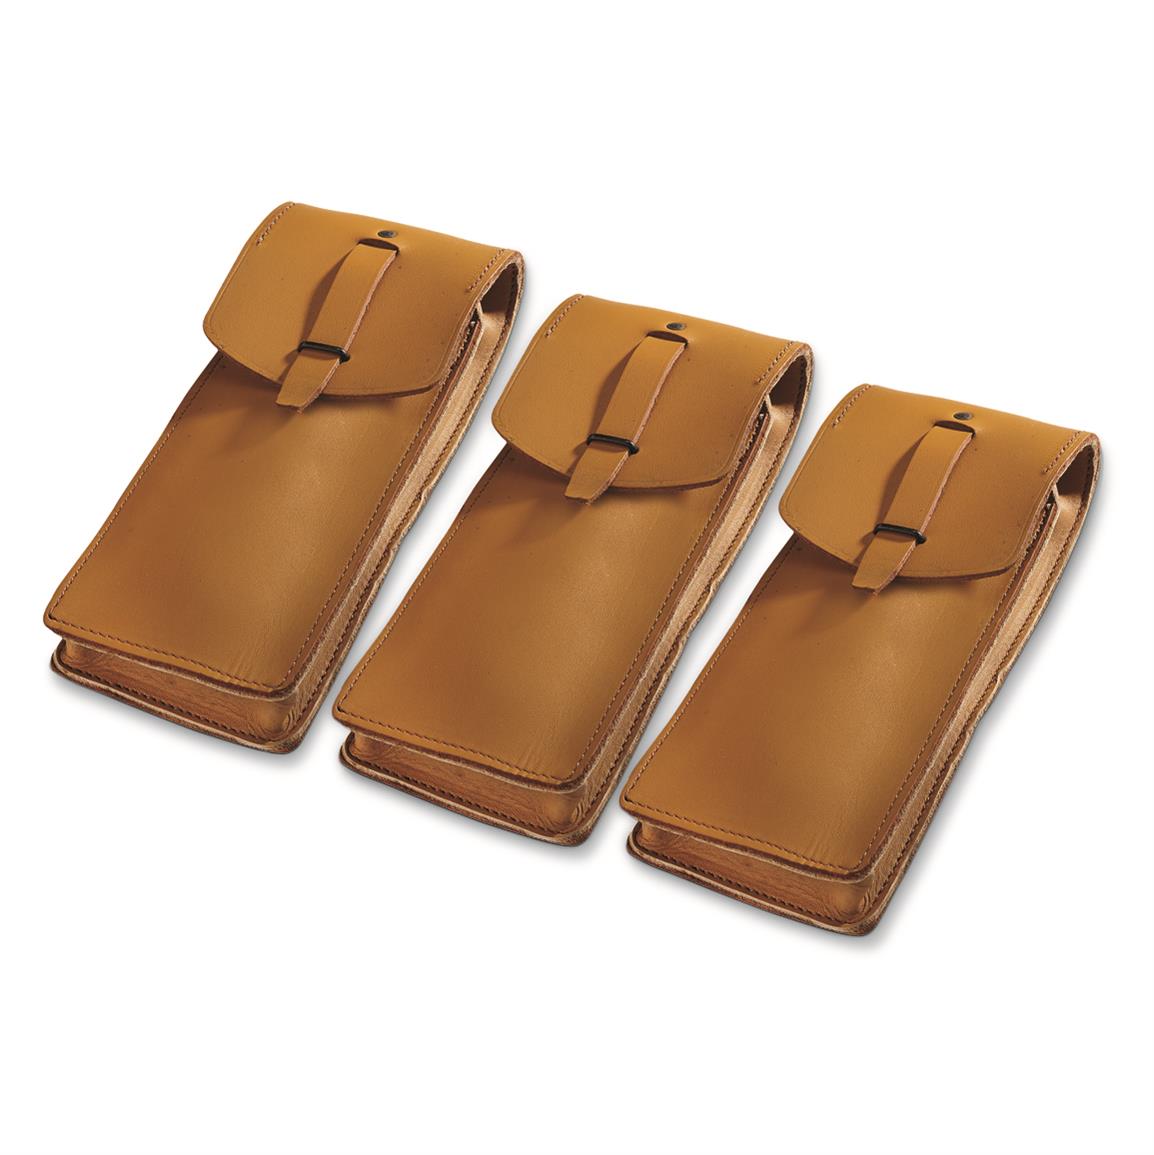 French Military Surplus MAT 49 Magazine Pouches, 3 Pack, Used